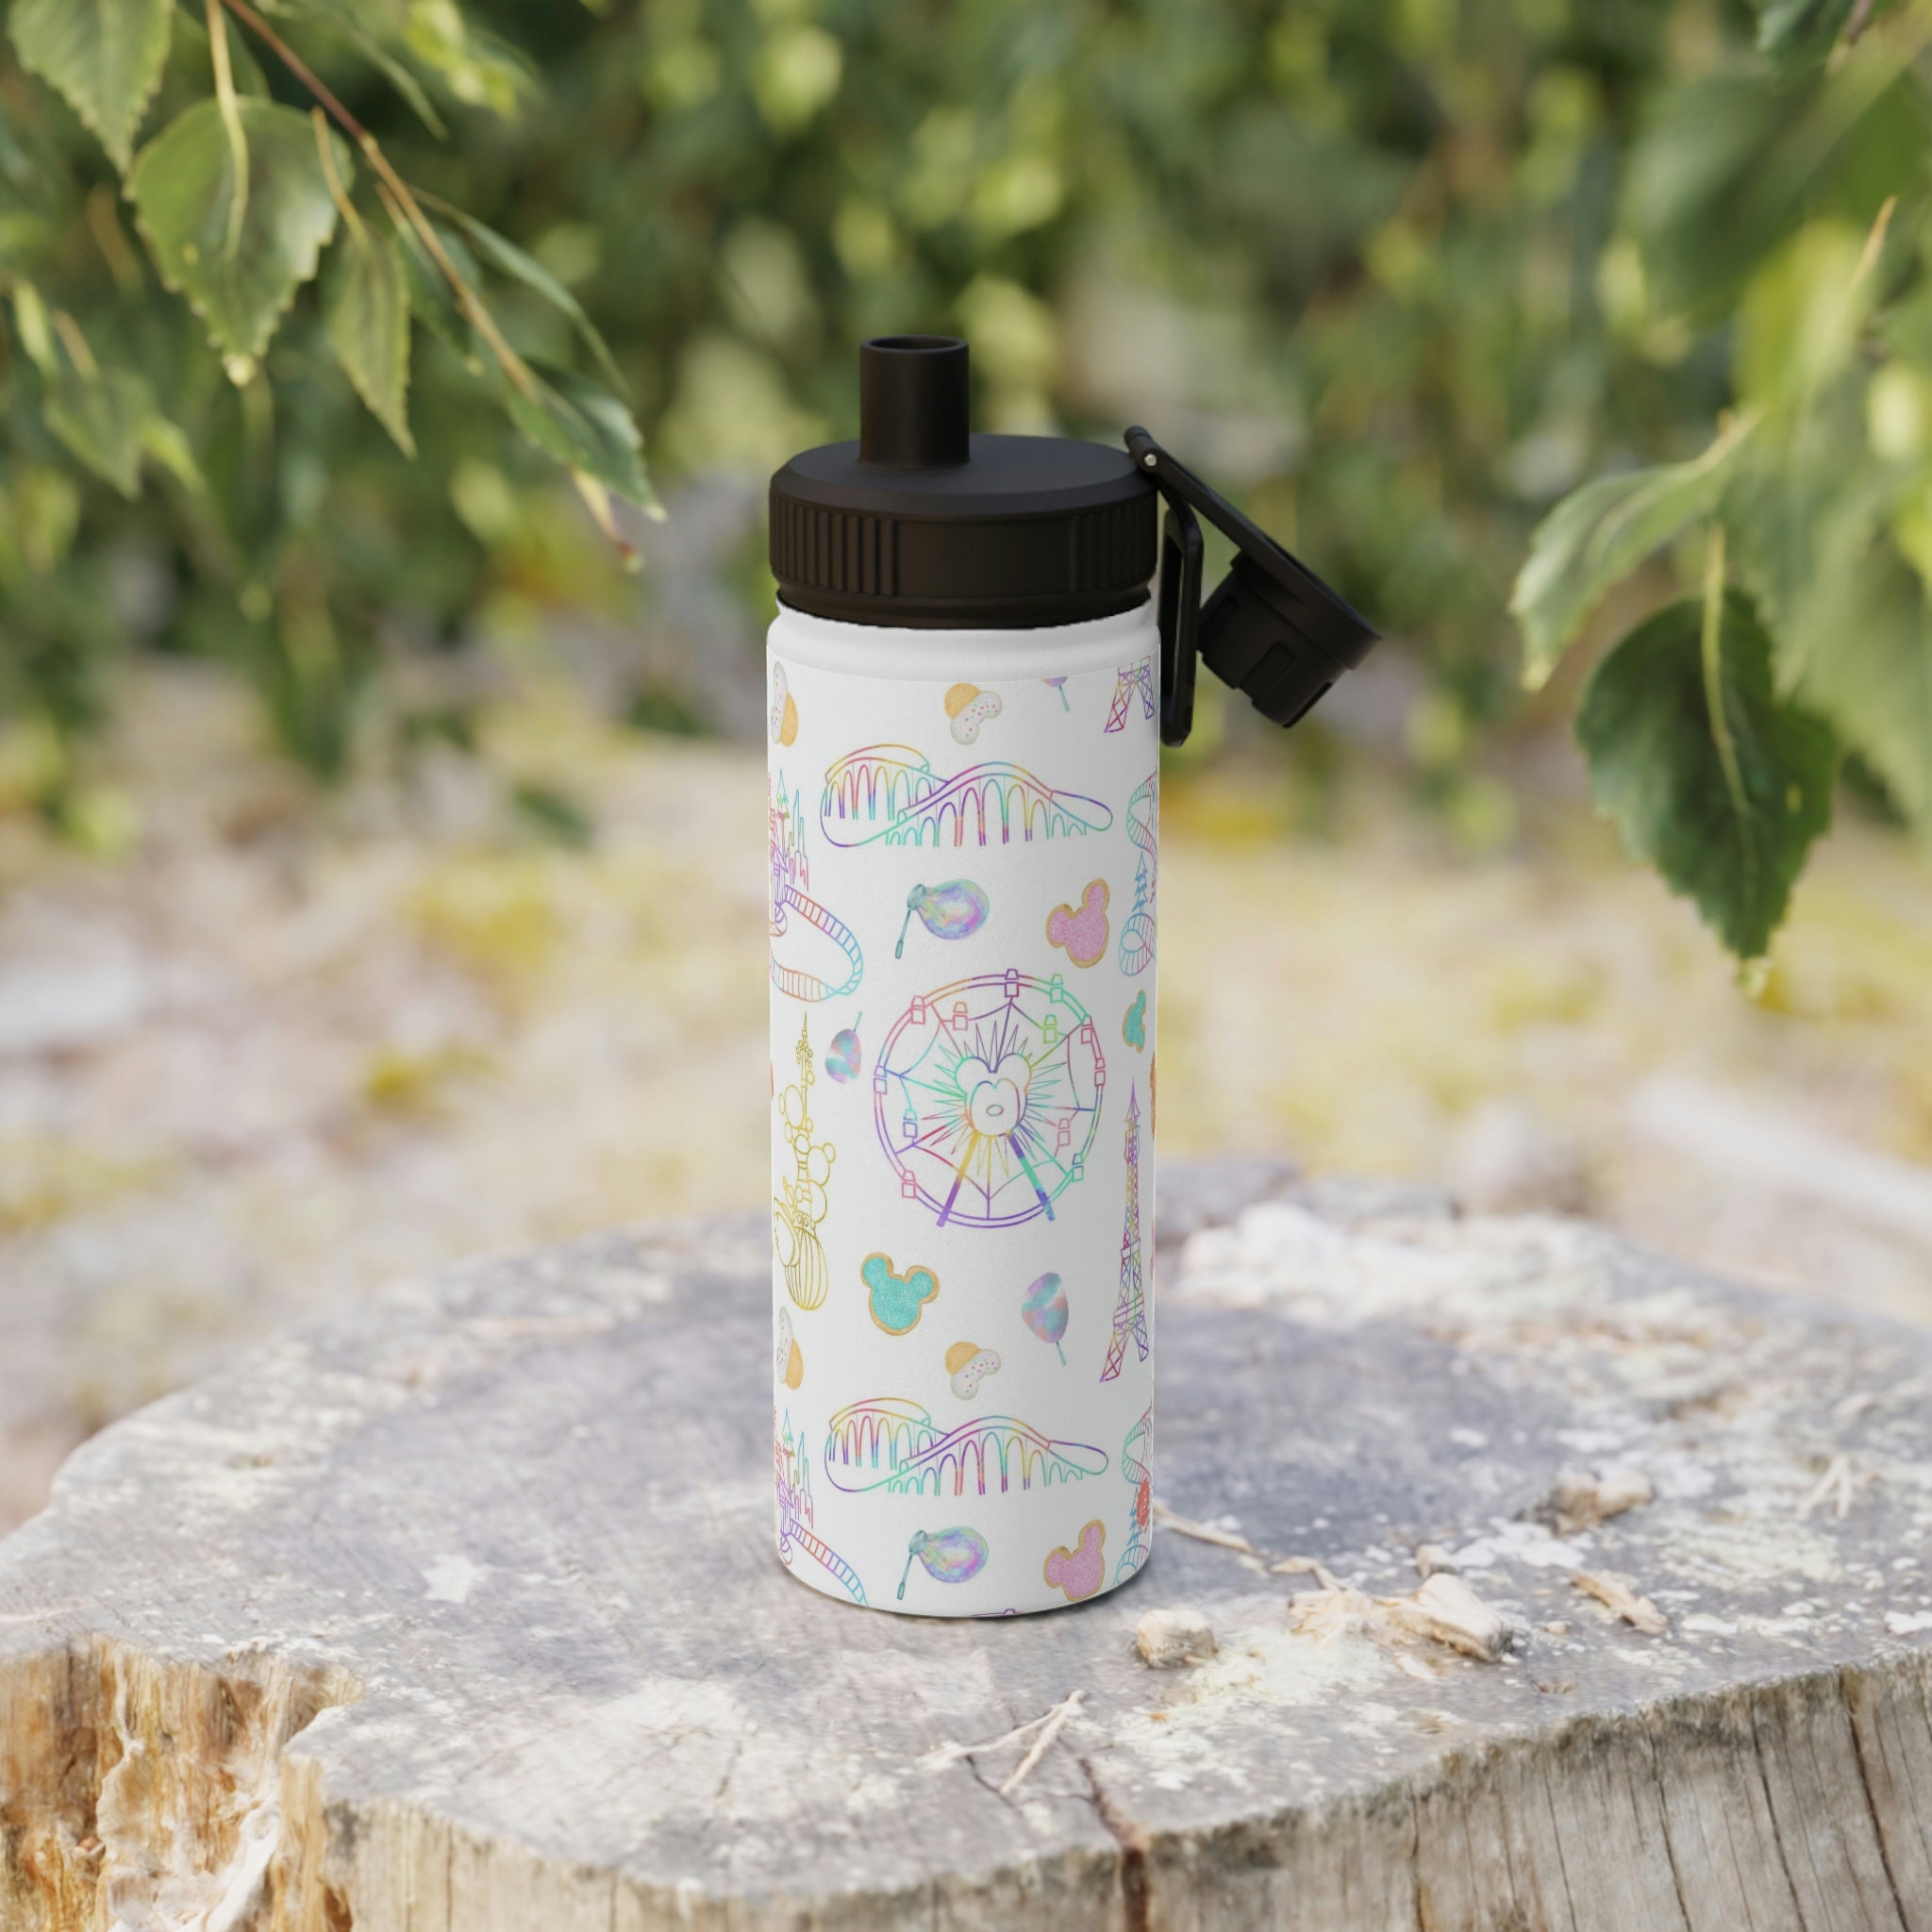 Discover Icons Stainless Steel Water Bottle ディズニー社100周年 ステンレス鋼の水筒標準リッド、ファン記念品 誕生日 ギフト通販 Gifts